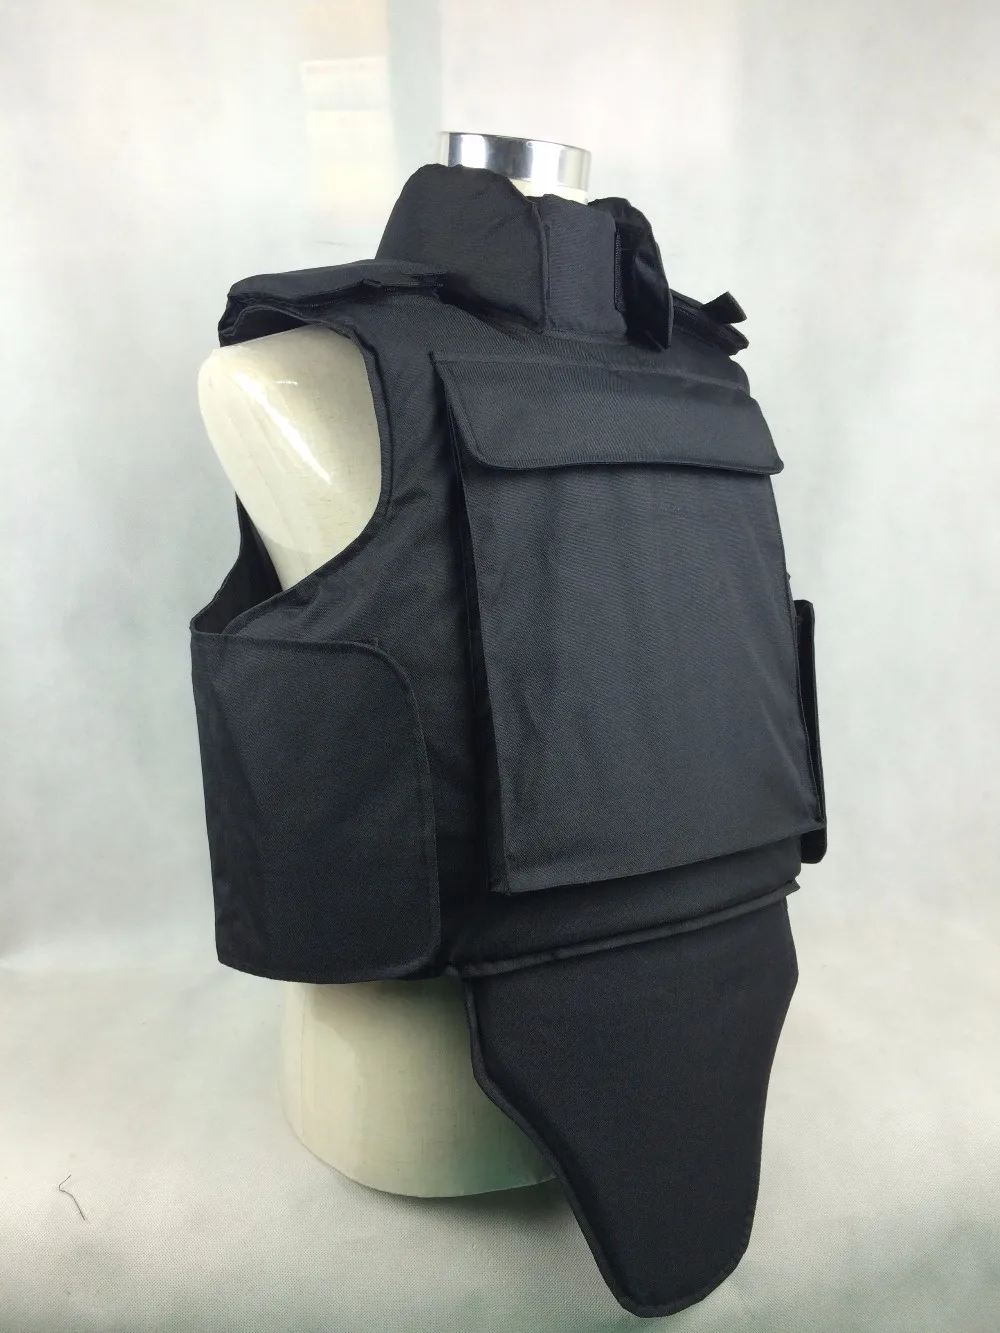 Full Protection Bullet Proof Vest With Neck Protector - Buy Bulletproof